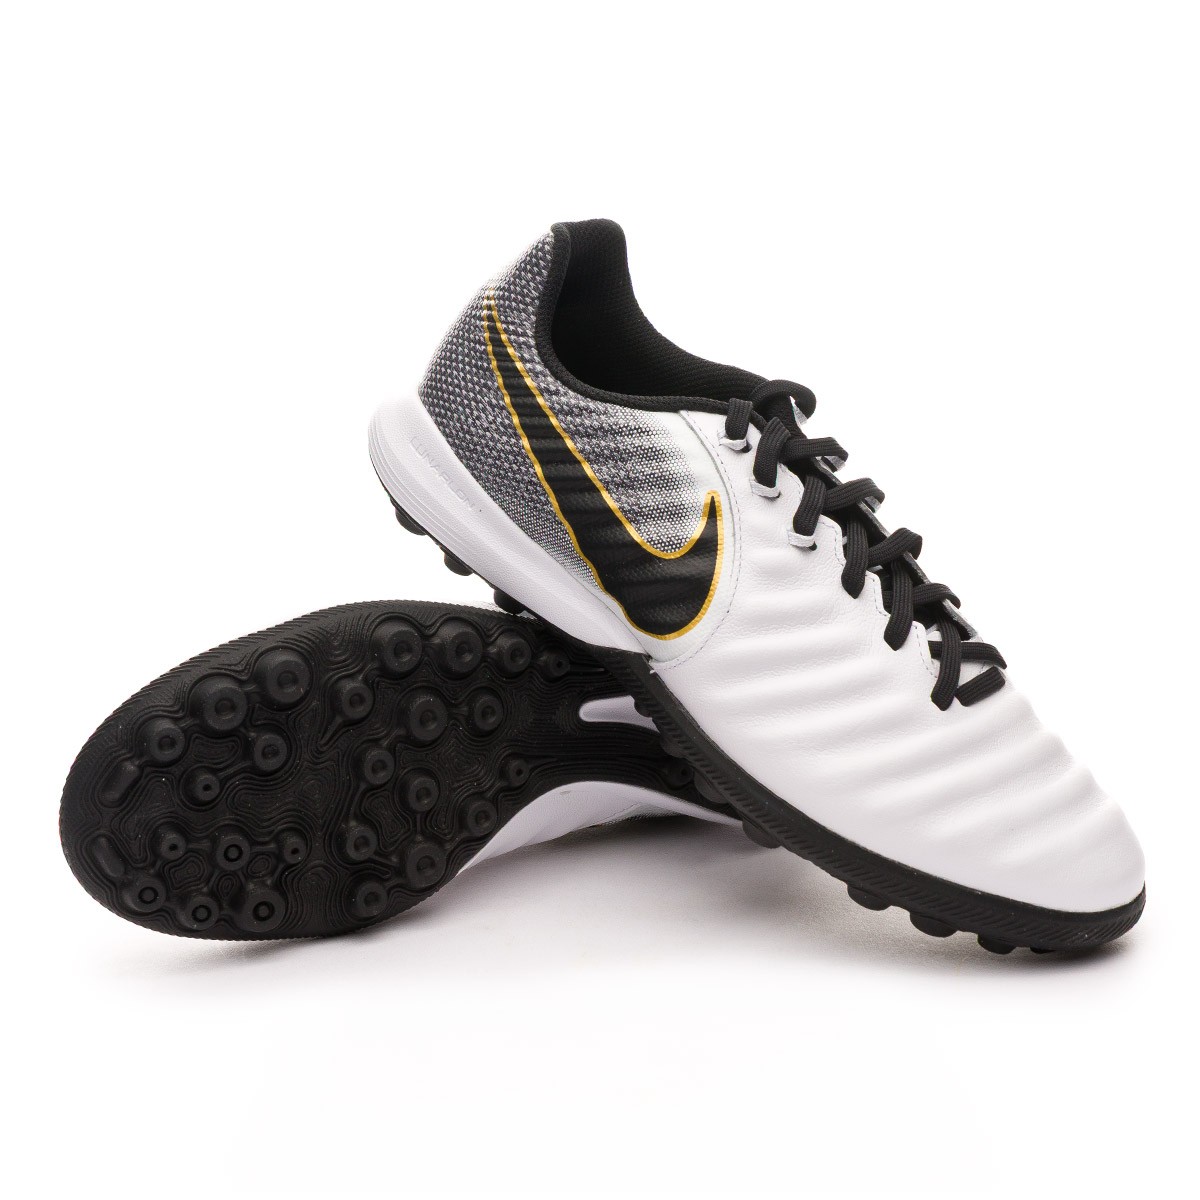 sponsor approach Armstrong Nike Tiempo Lunar Pro France, SAVE 51% - aveclumiere.com